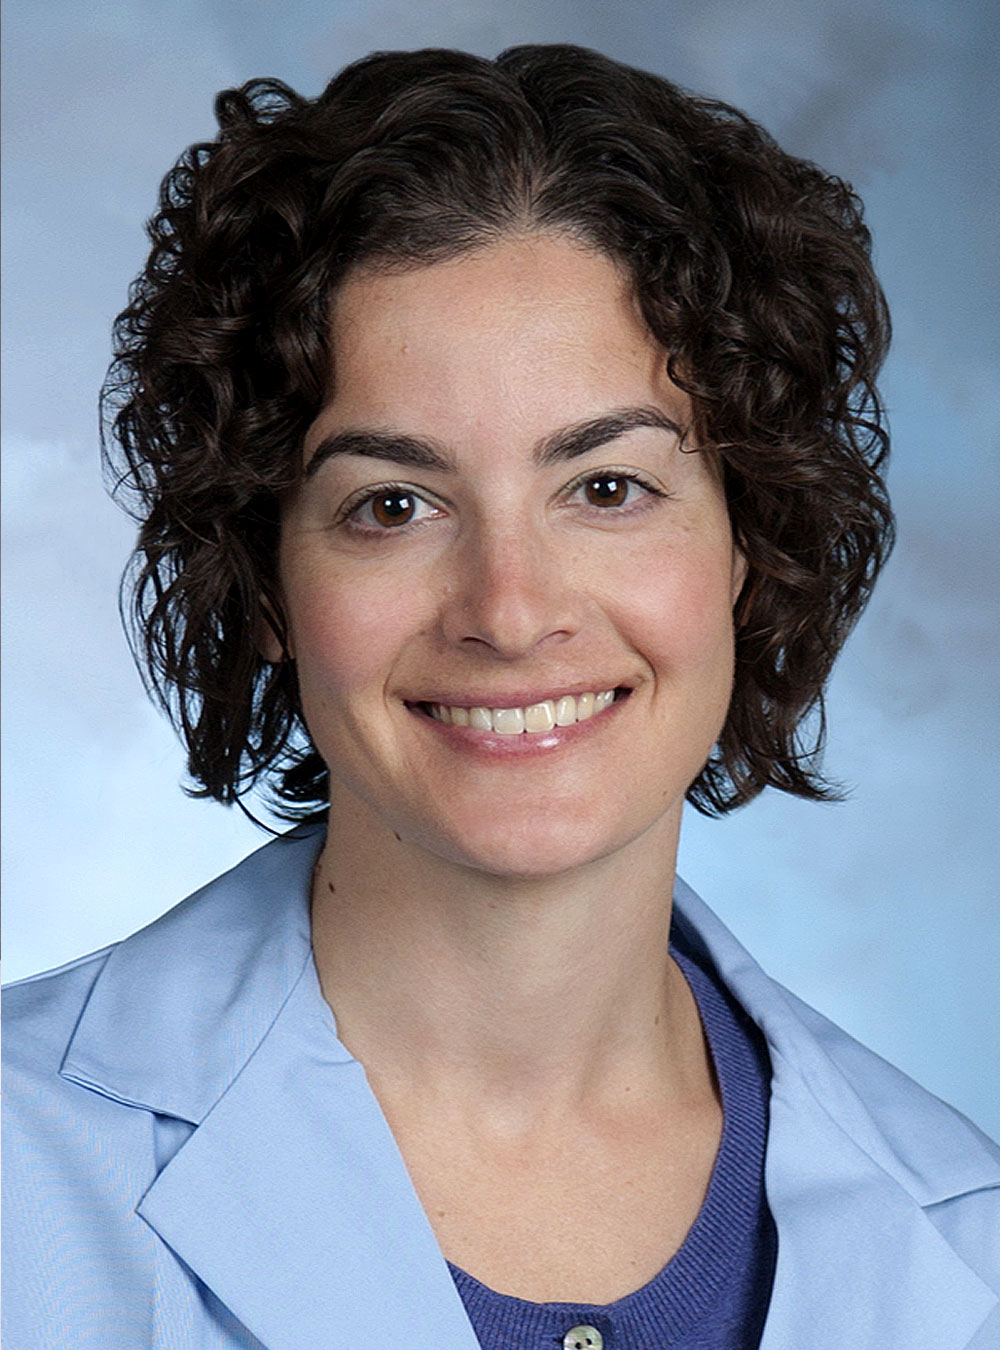 Stritch School of Medicine faculty member, Kate Goldhaber